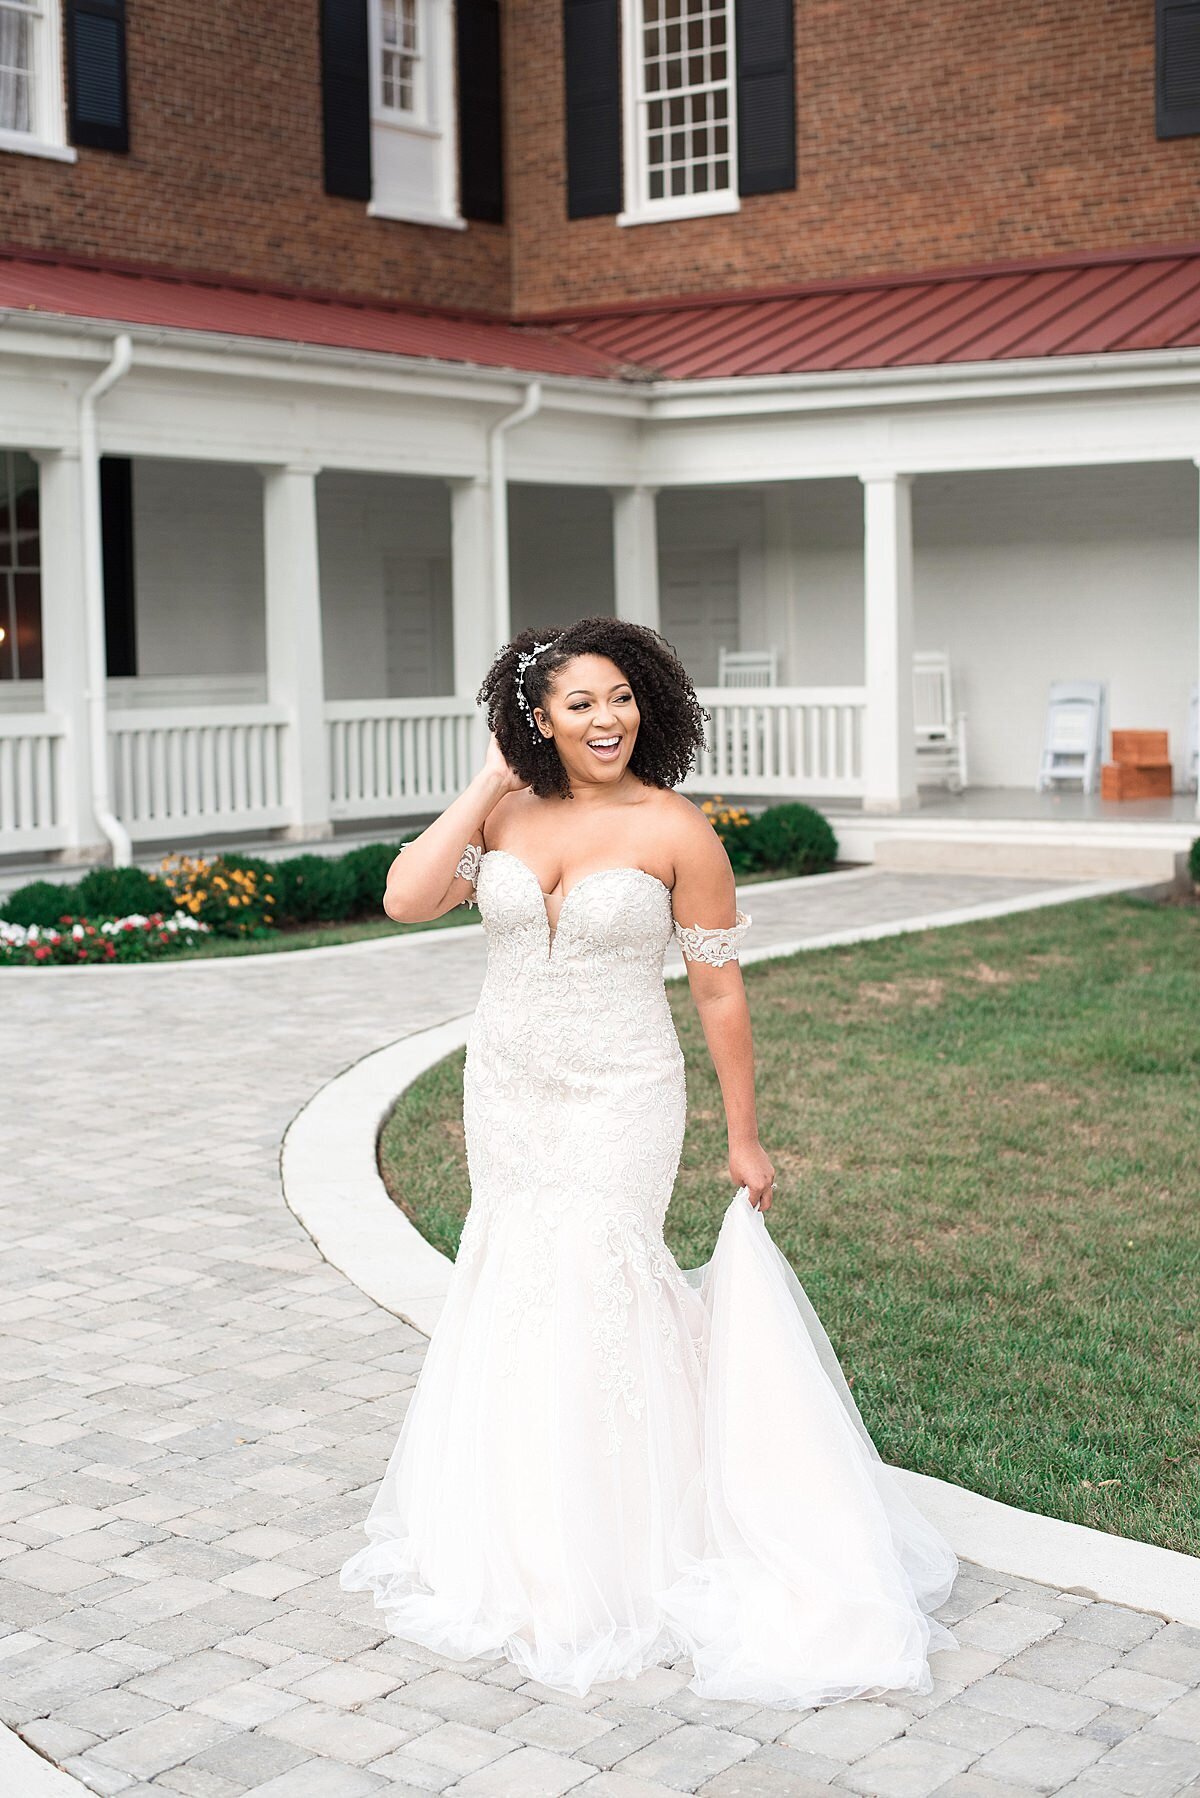 The African America bride, Jasmine Sweet, wearing an off the shoulder lace mermaid wedding gown with a long train smiles at her wedding guests as she walks down the path at the back of Ravenswood Mansion towards the courtyard where her guests are waiting.